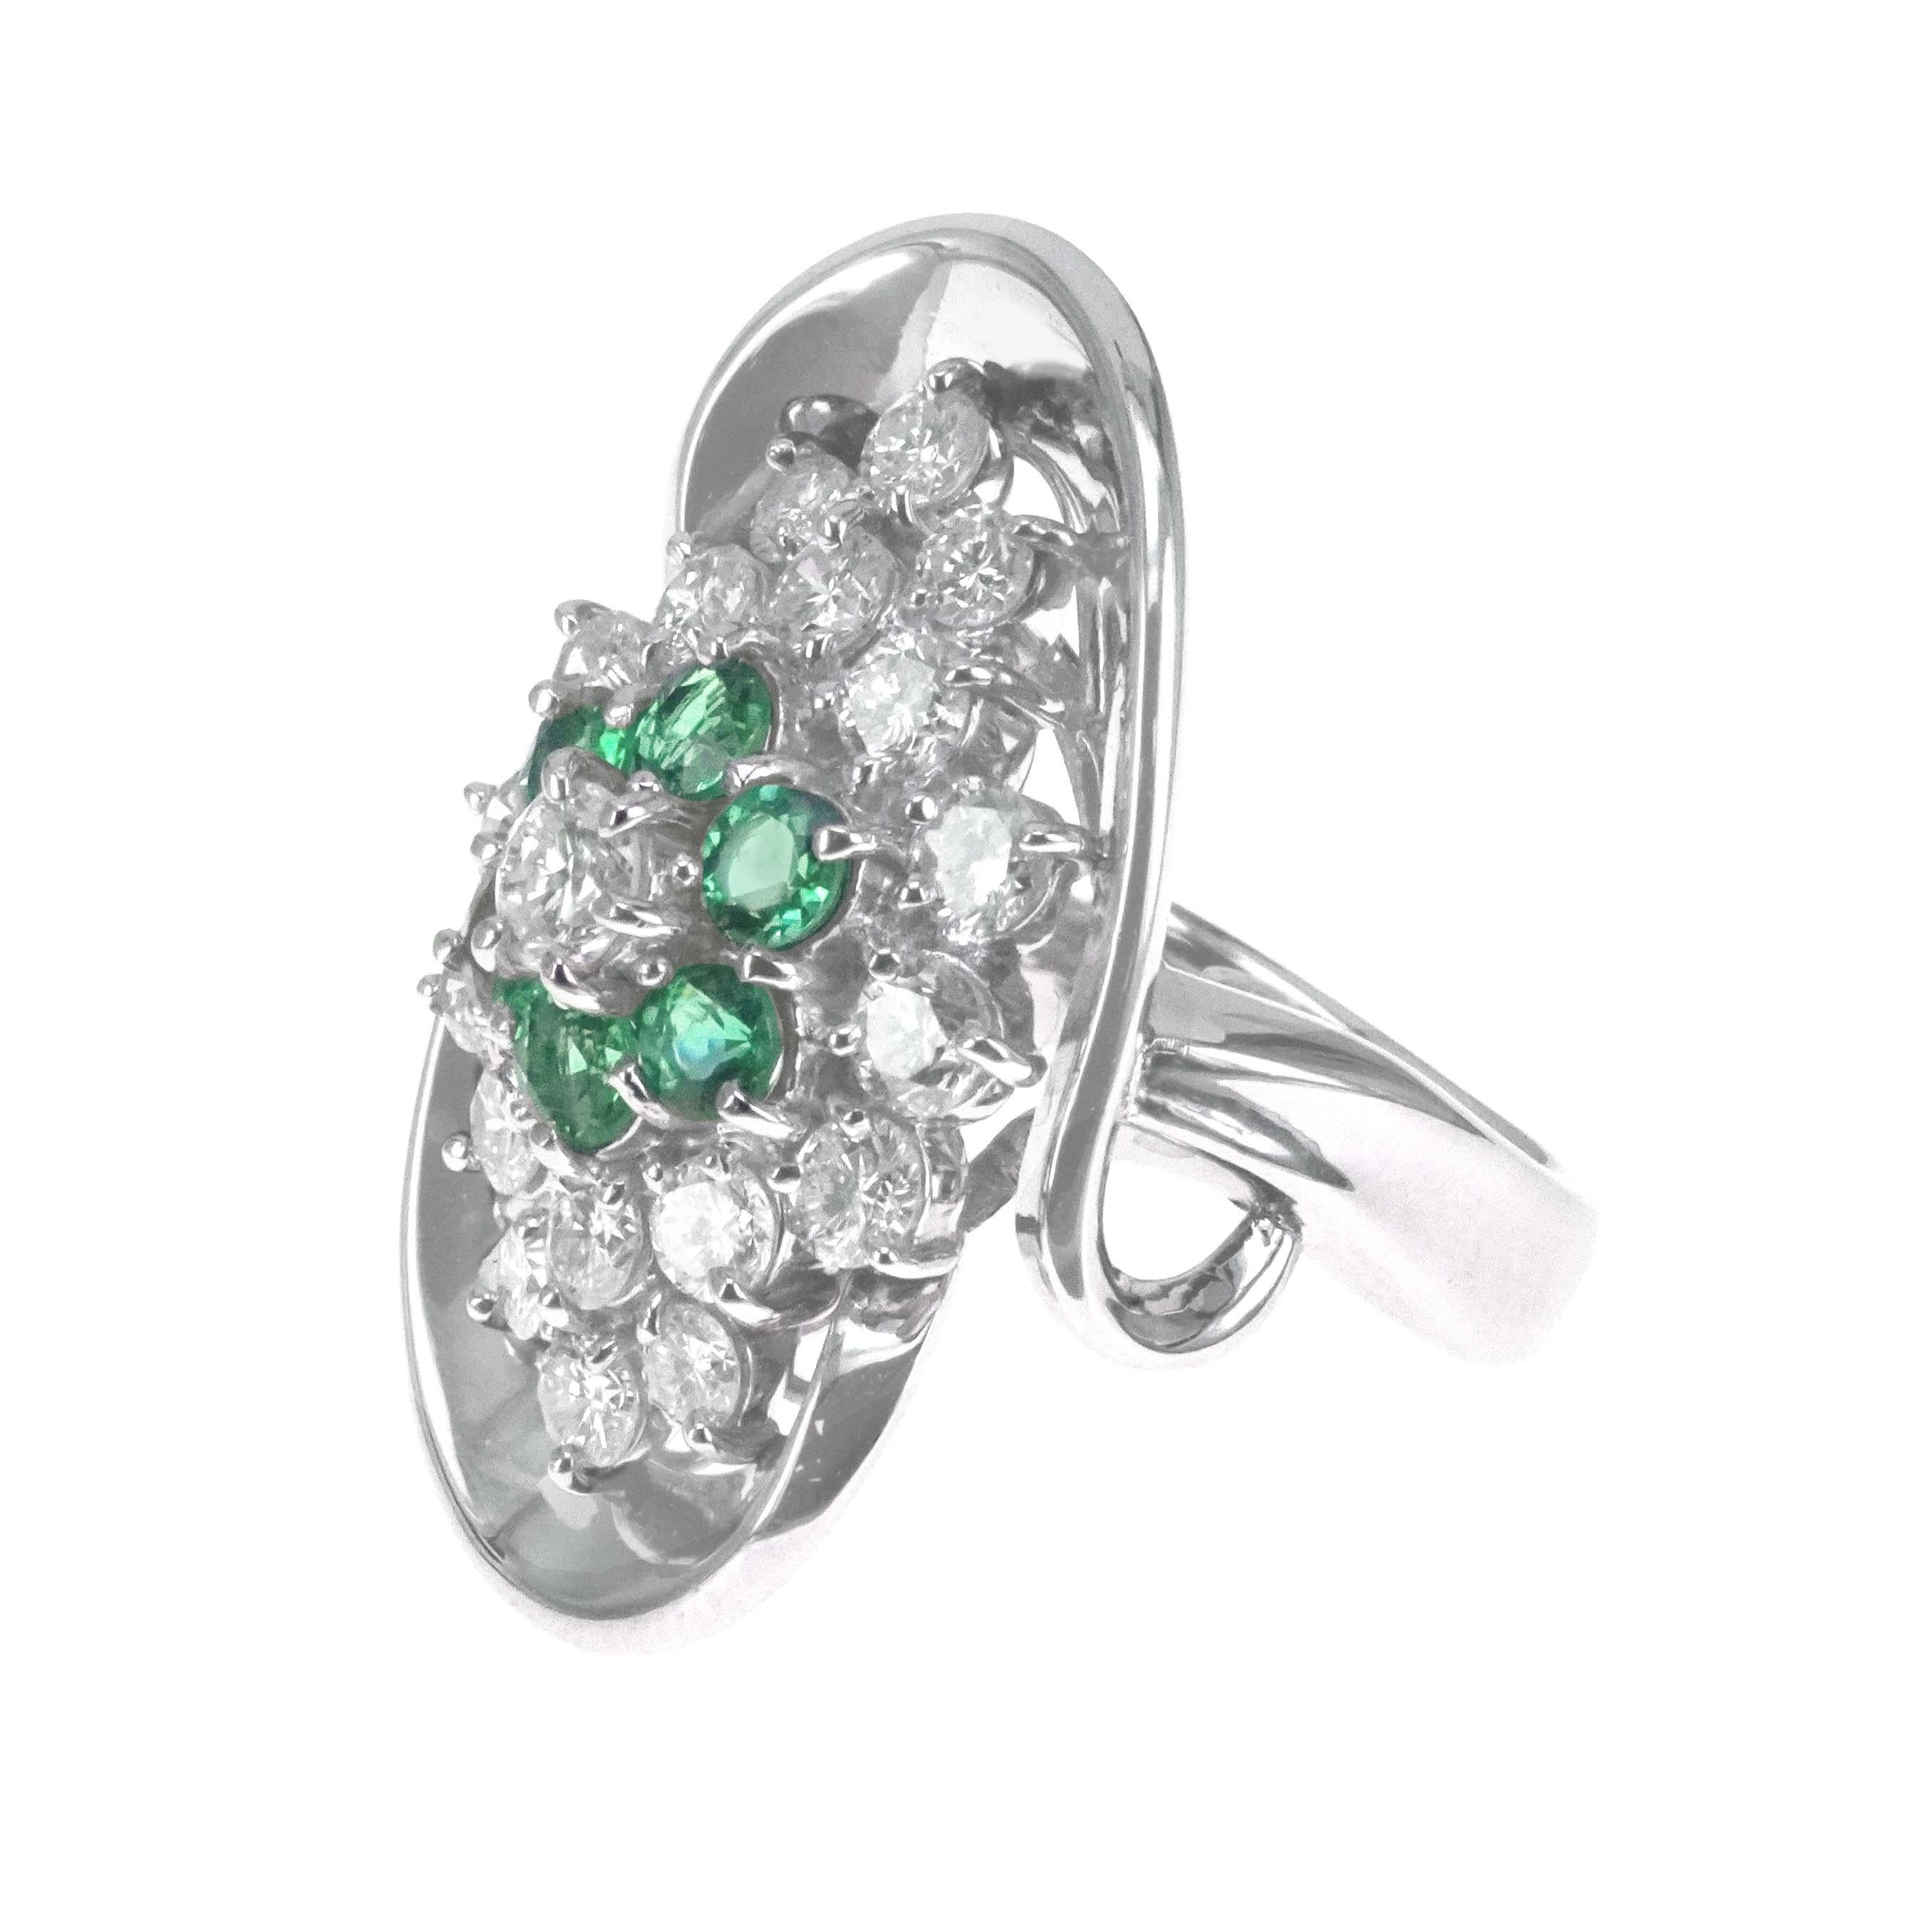 Certified by the Japan and Germany Gemological Laboratory, 0.65 carats of Colombian Emeralds are set with 1.67 carat of white brilliant round diamond, The details of the diamond are mentioned below:
Color: D
Clarity: VVS
The ring is made in Platinum